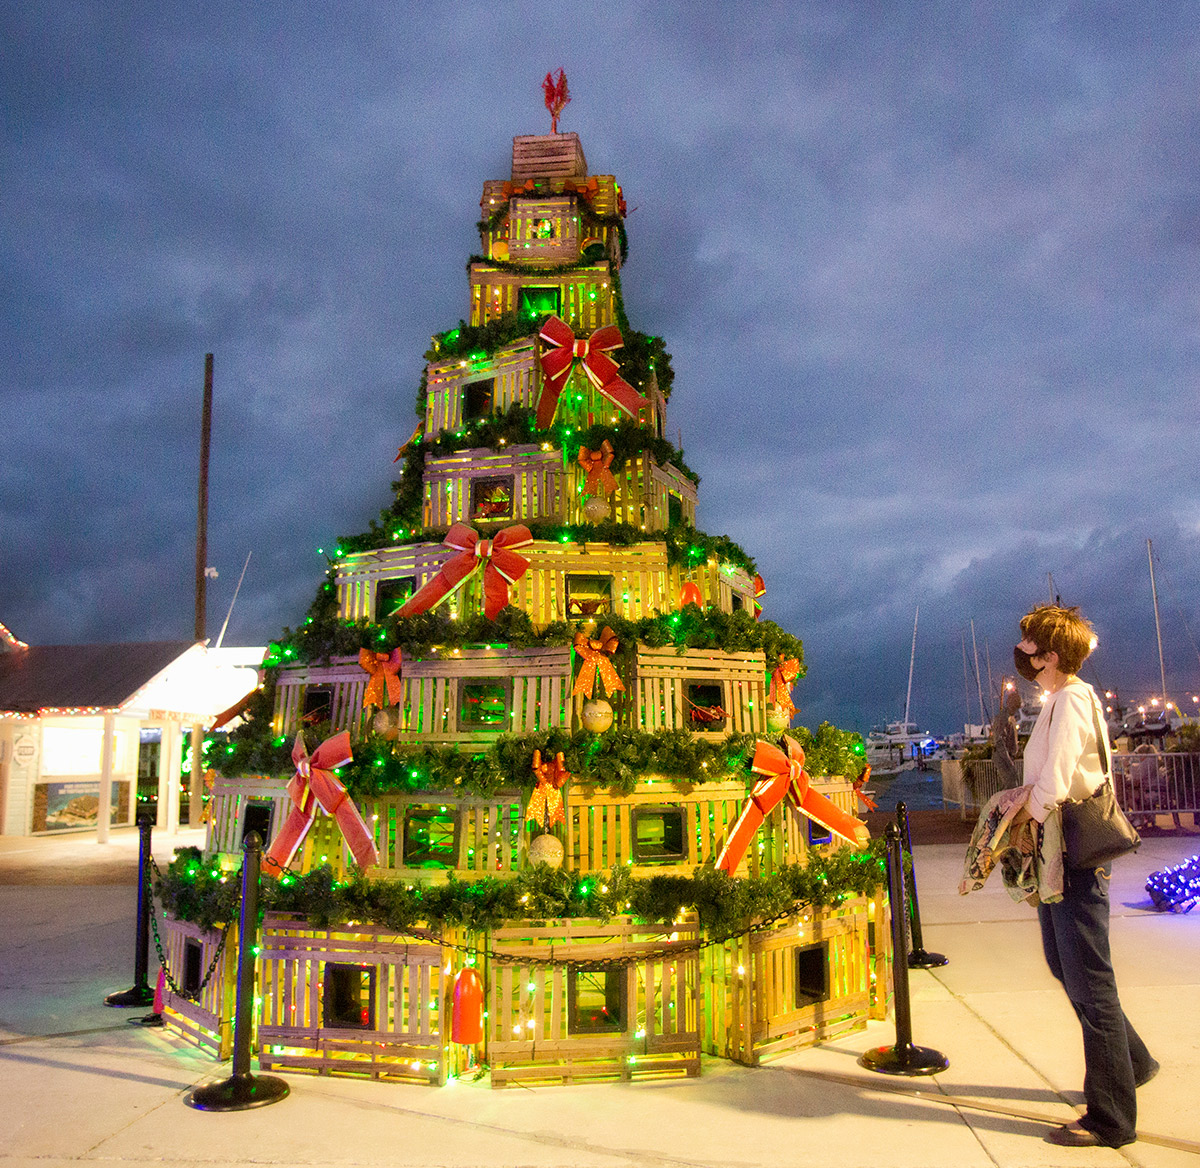 Christmas In Key Largo 2022 Subdued Holiday Fest Still Sparkles At Key West Harbor - Florida Keys Weekly Newspapers